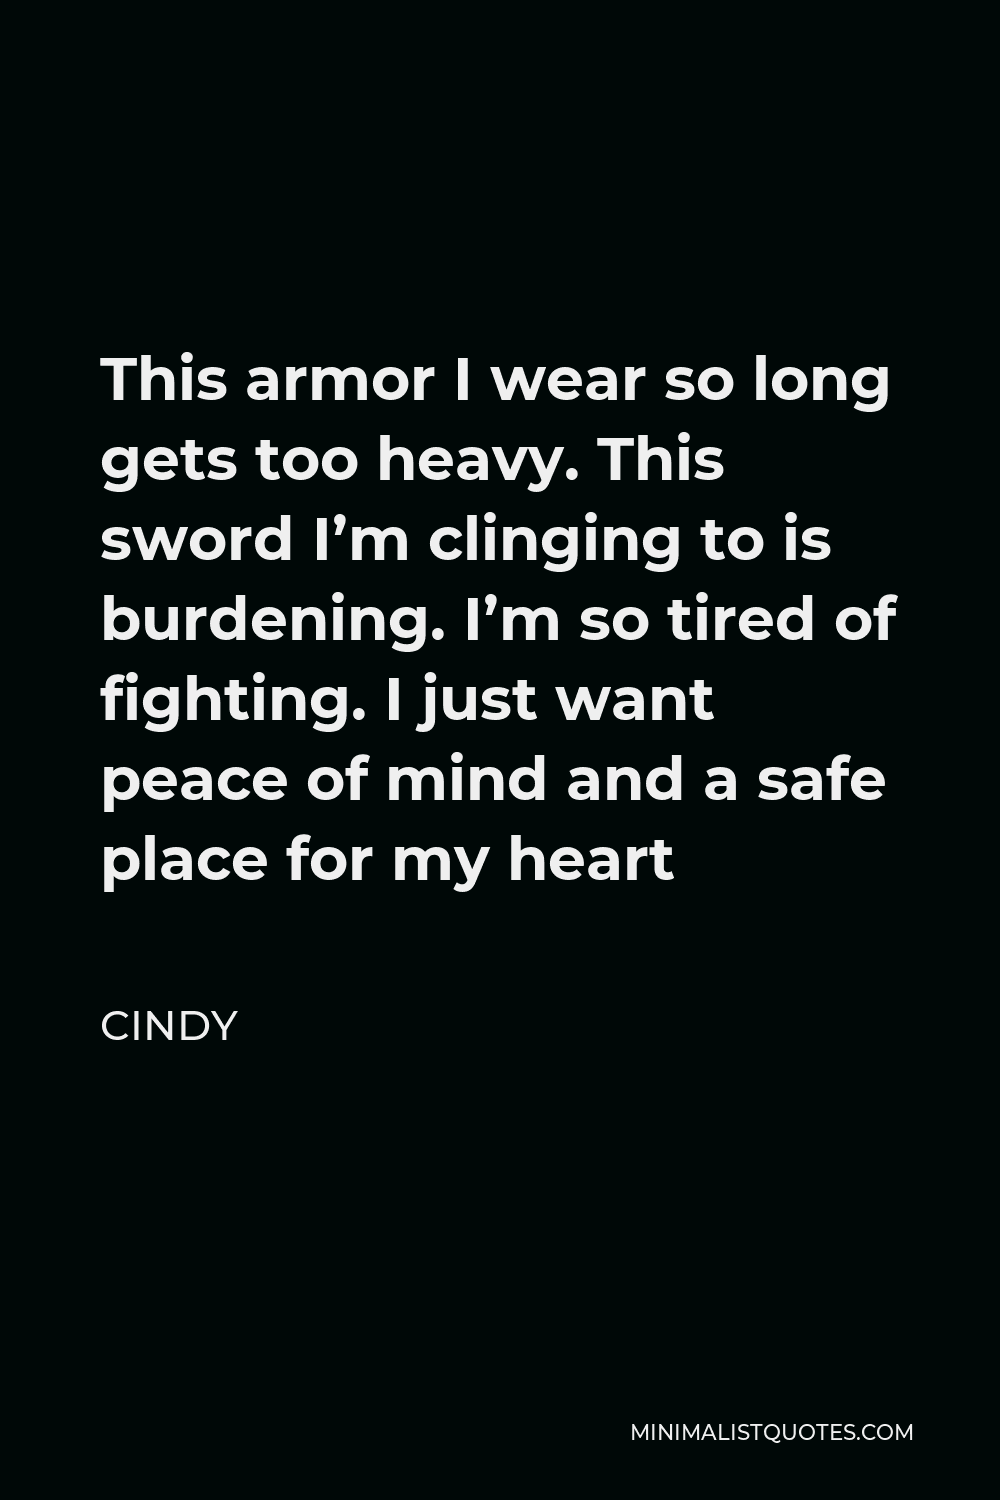 Cindy Quote - This armor I wear so long gets too heavy. This sword I’m clinging to is burdening. I’m so tired of fighting. I just want peace of mind and a safe place for my heart